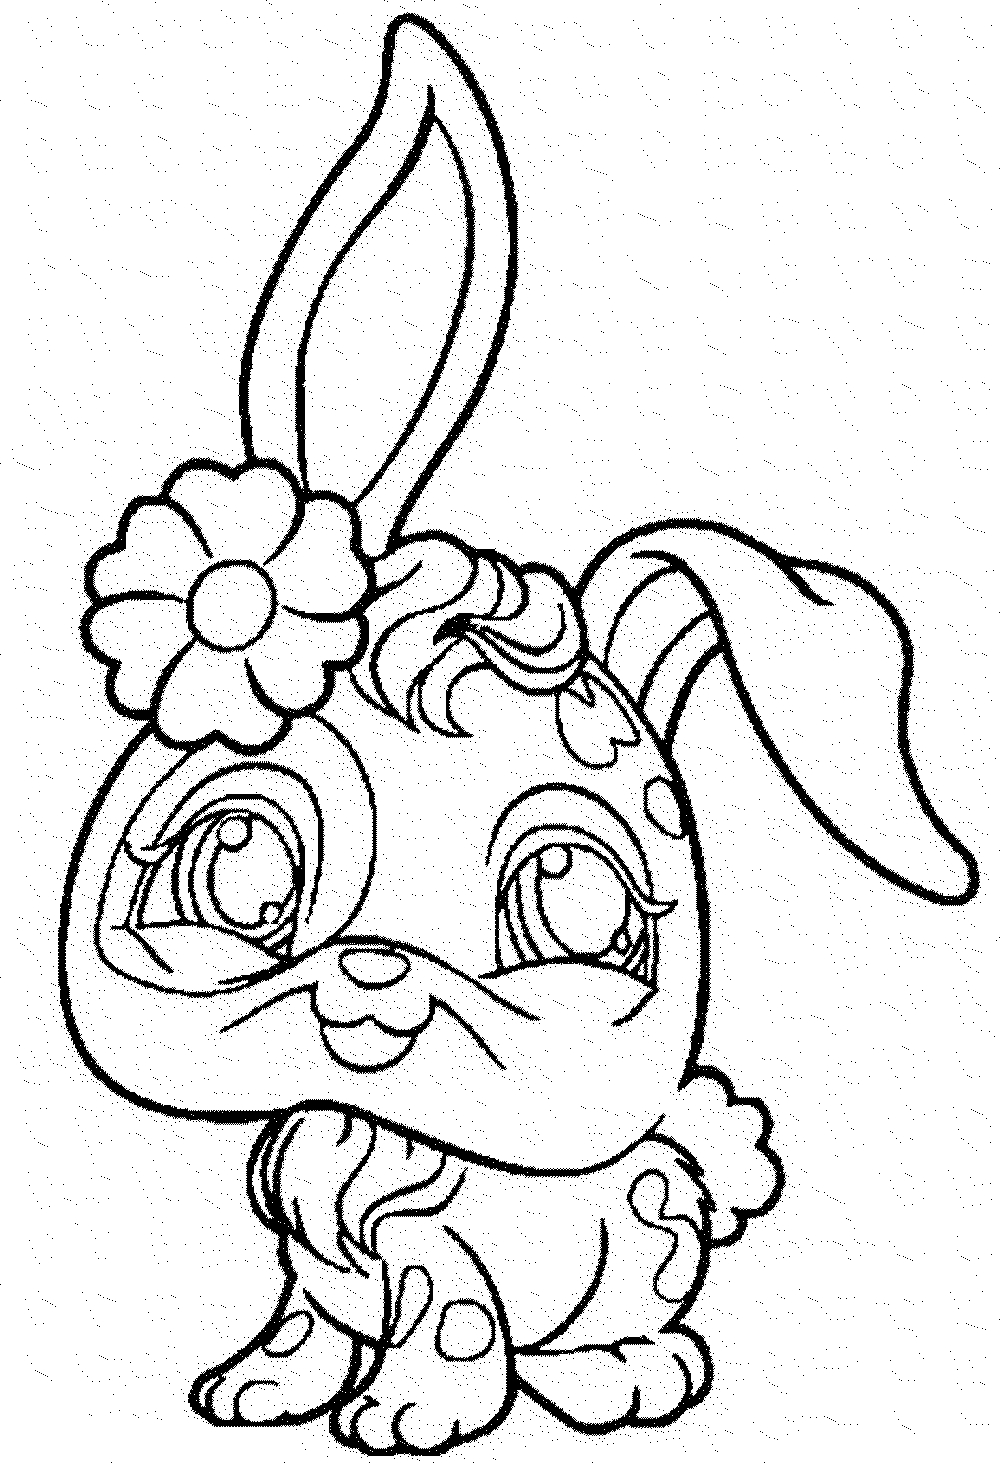 Lps Dog Coloring Pages at GetColorings.com | Free ...